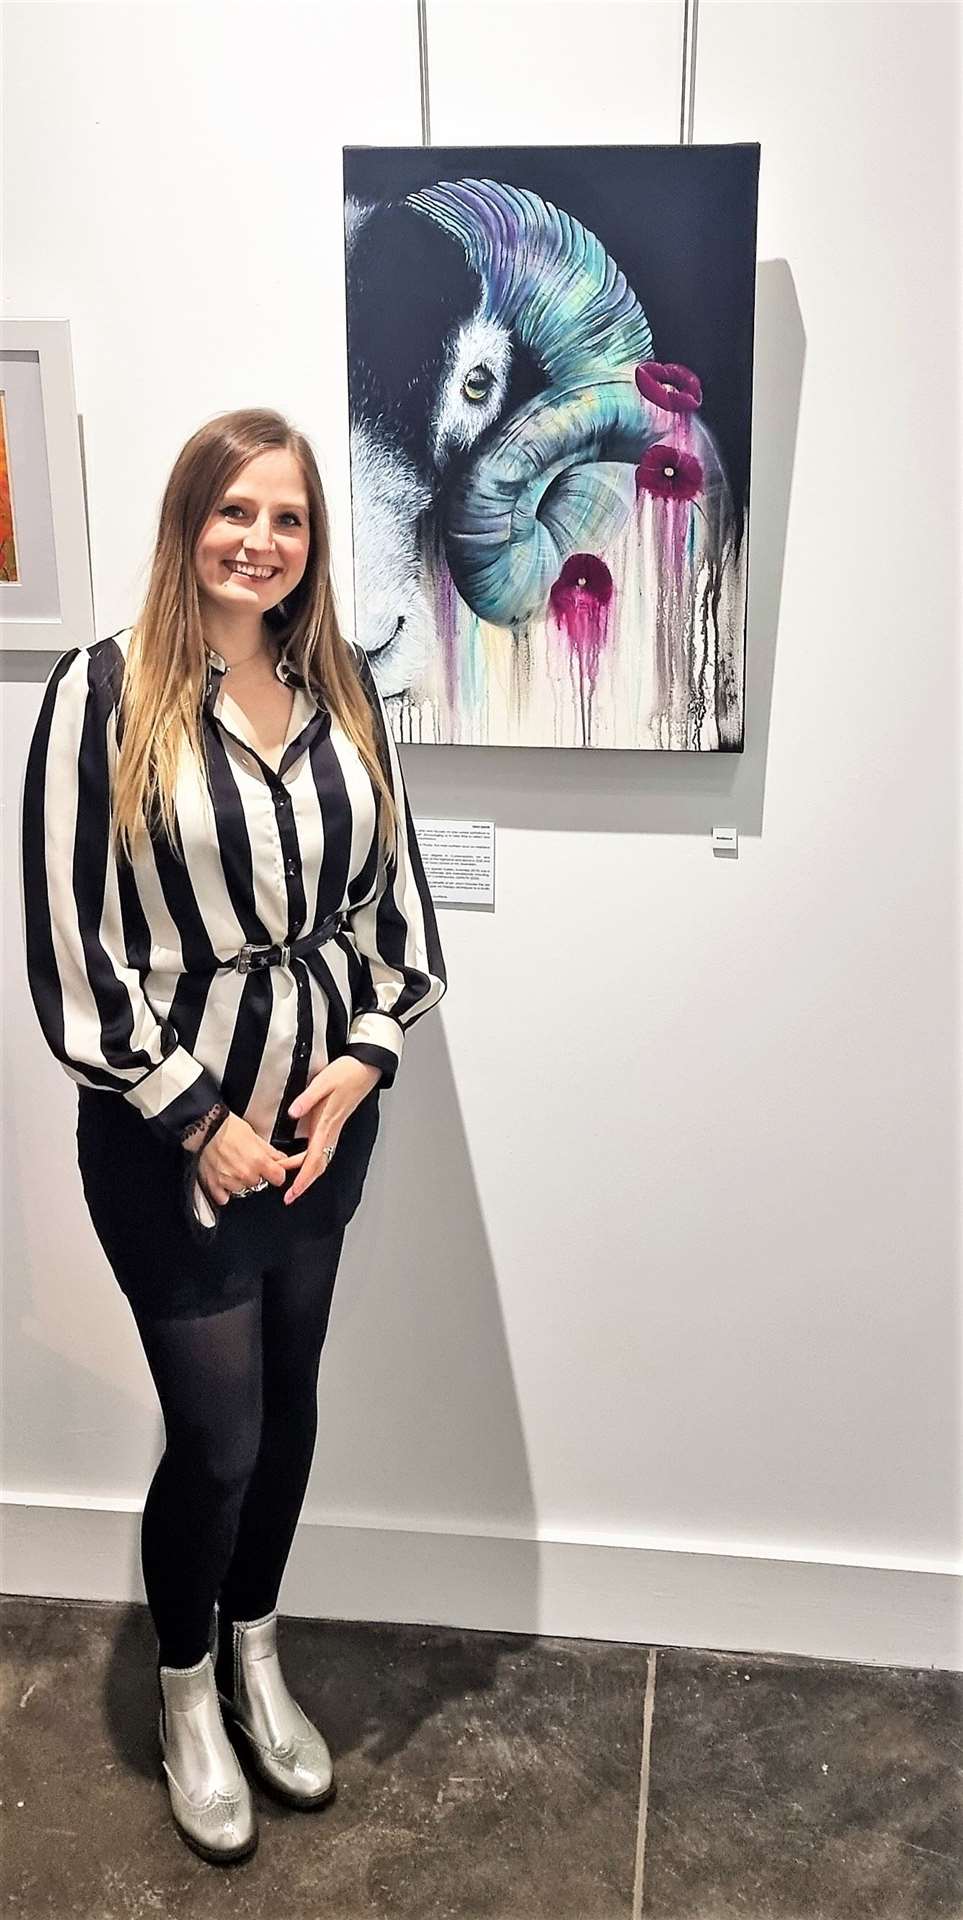 Leah Davis with her painting called Resilience.